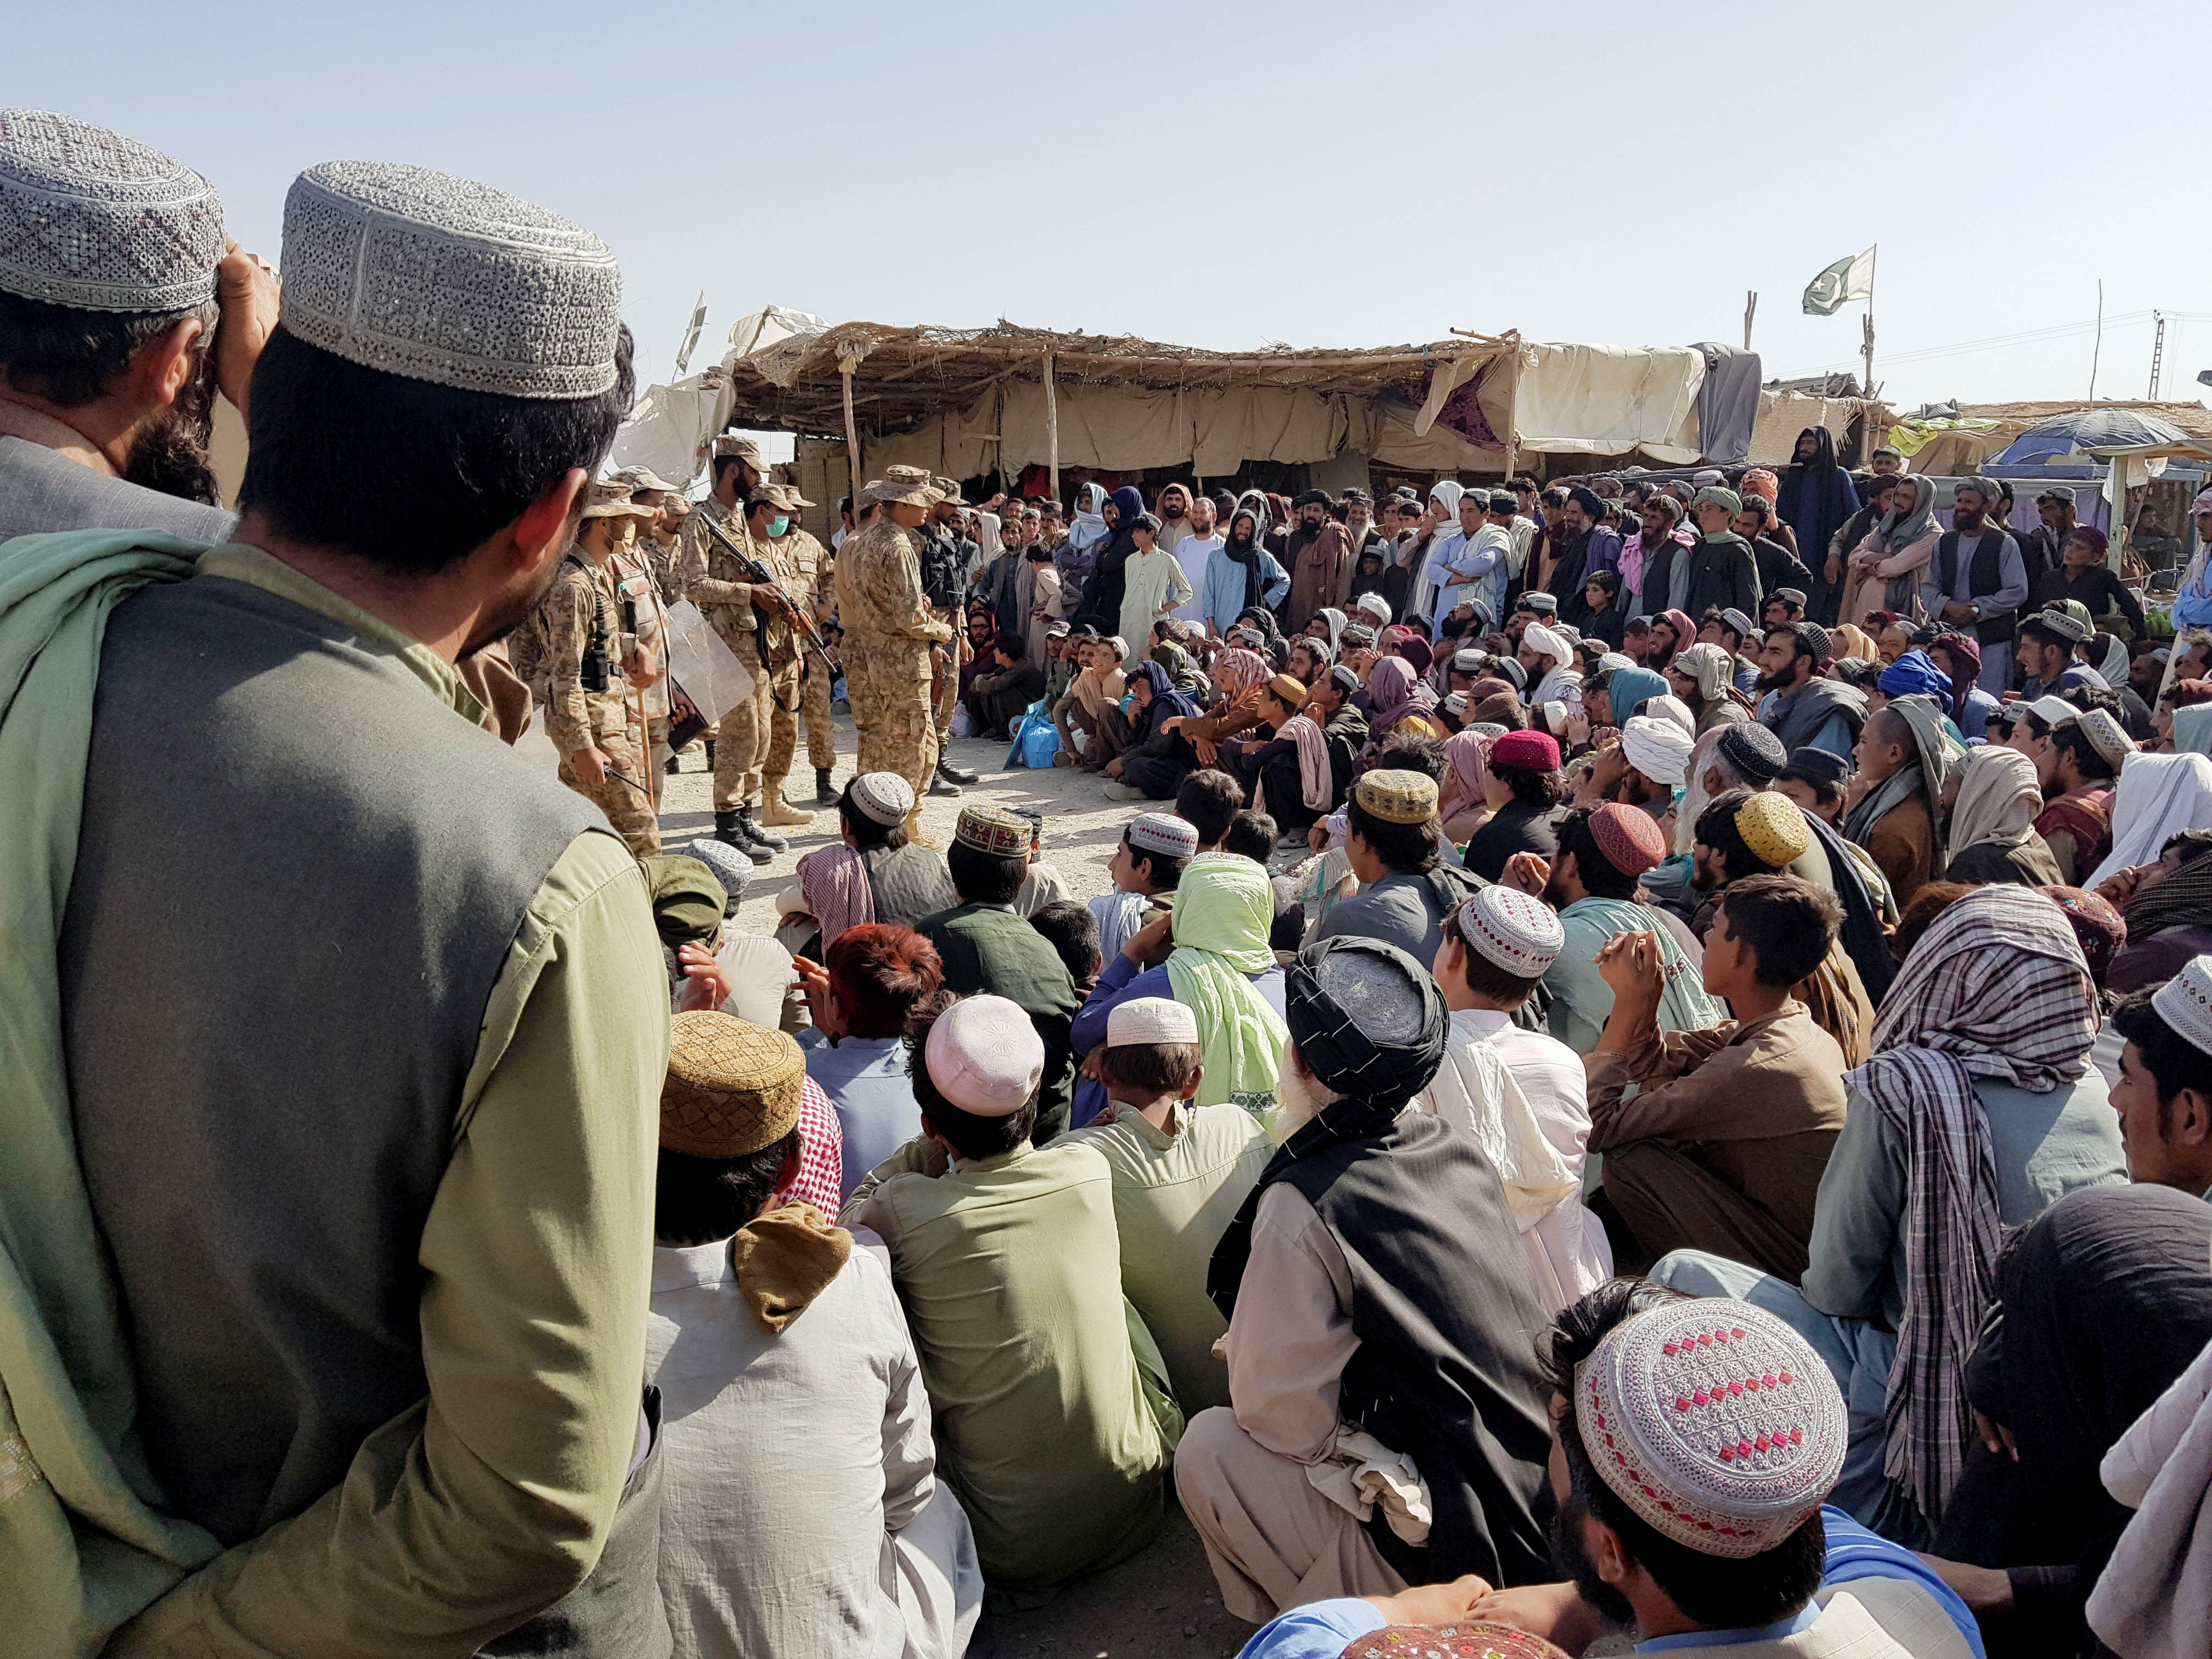 Pakistan's Army soldiers talk with people who gather to cross at the Friendship Gate crossing point in the Pakistan-Afghanistan border town of Chaman